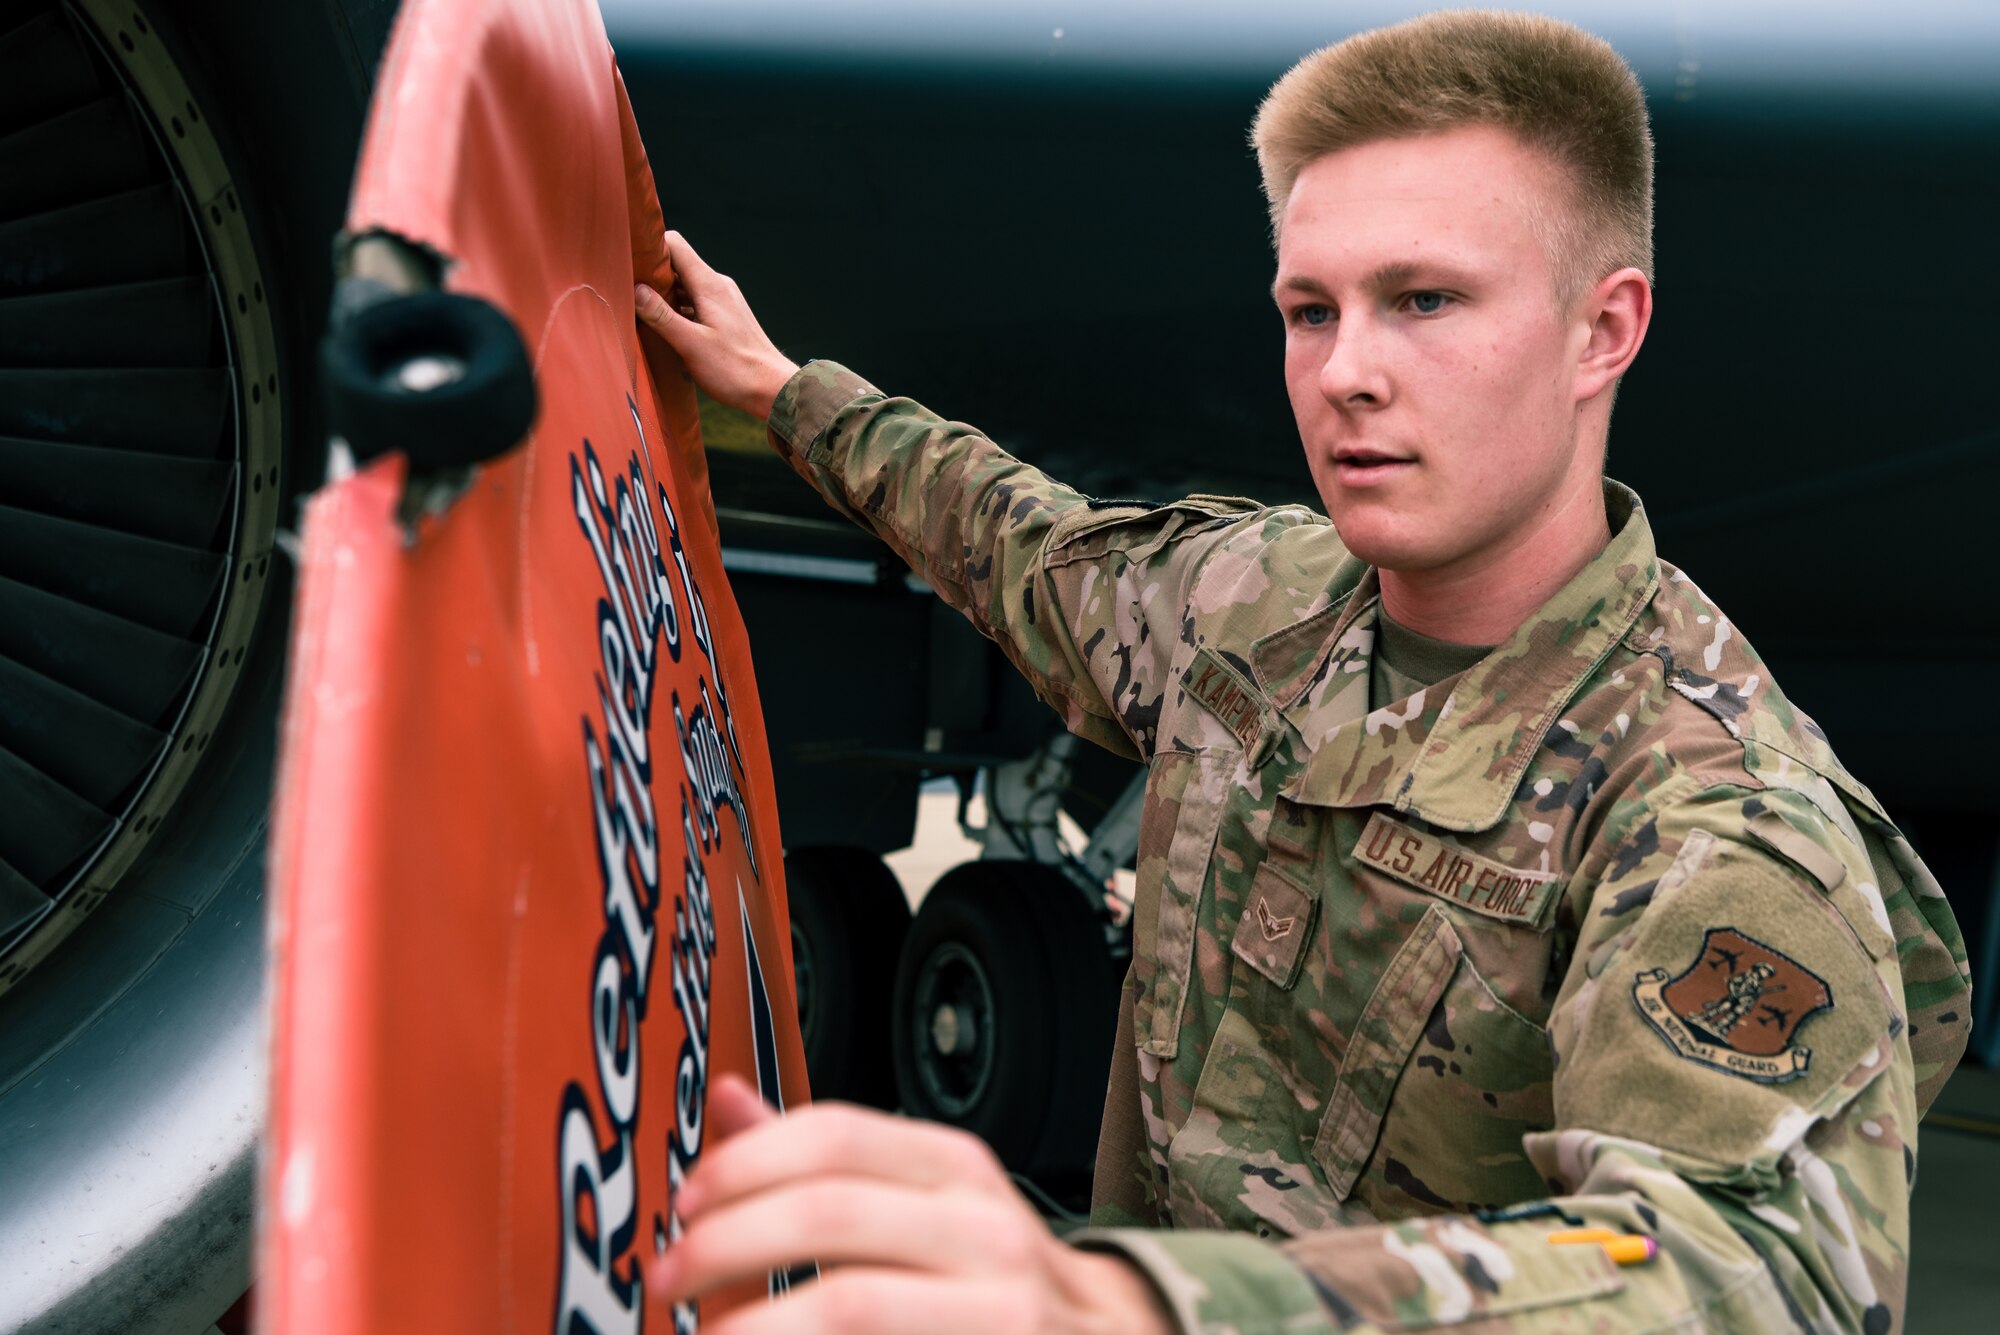 U.S. Air National Guard Airman 1st Class Paul Kampwerth, 126th Air Refueling Squadron hydraulics apprentice, equips an engine cover on a KC-135 Stratotanker on Scott Air Force Base, Illinois, June 2, 2021. Kampwerth was putting on the engine cover to prevent debris from interfering with the aircraft engines while routine maintenance was performed. (U.S. Air Force photo by Airman 1st Class Mark Sulaica)